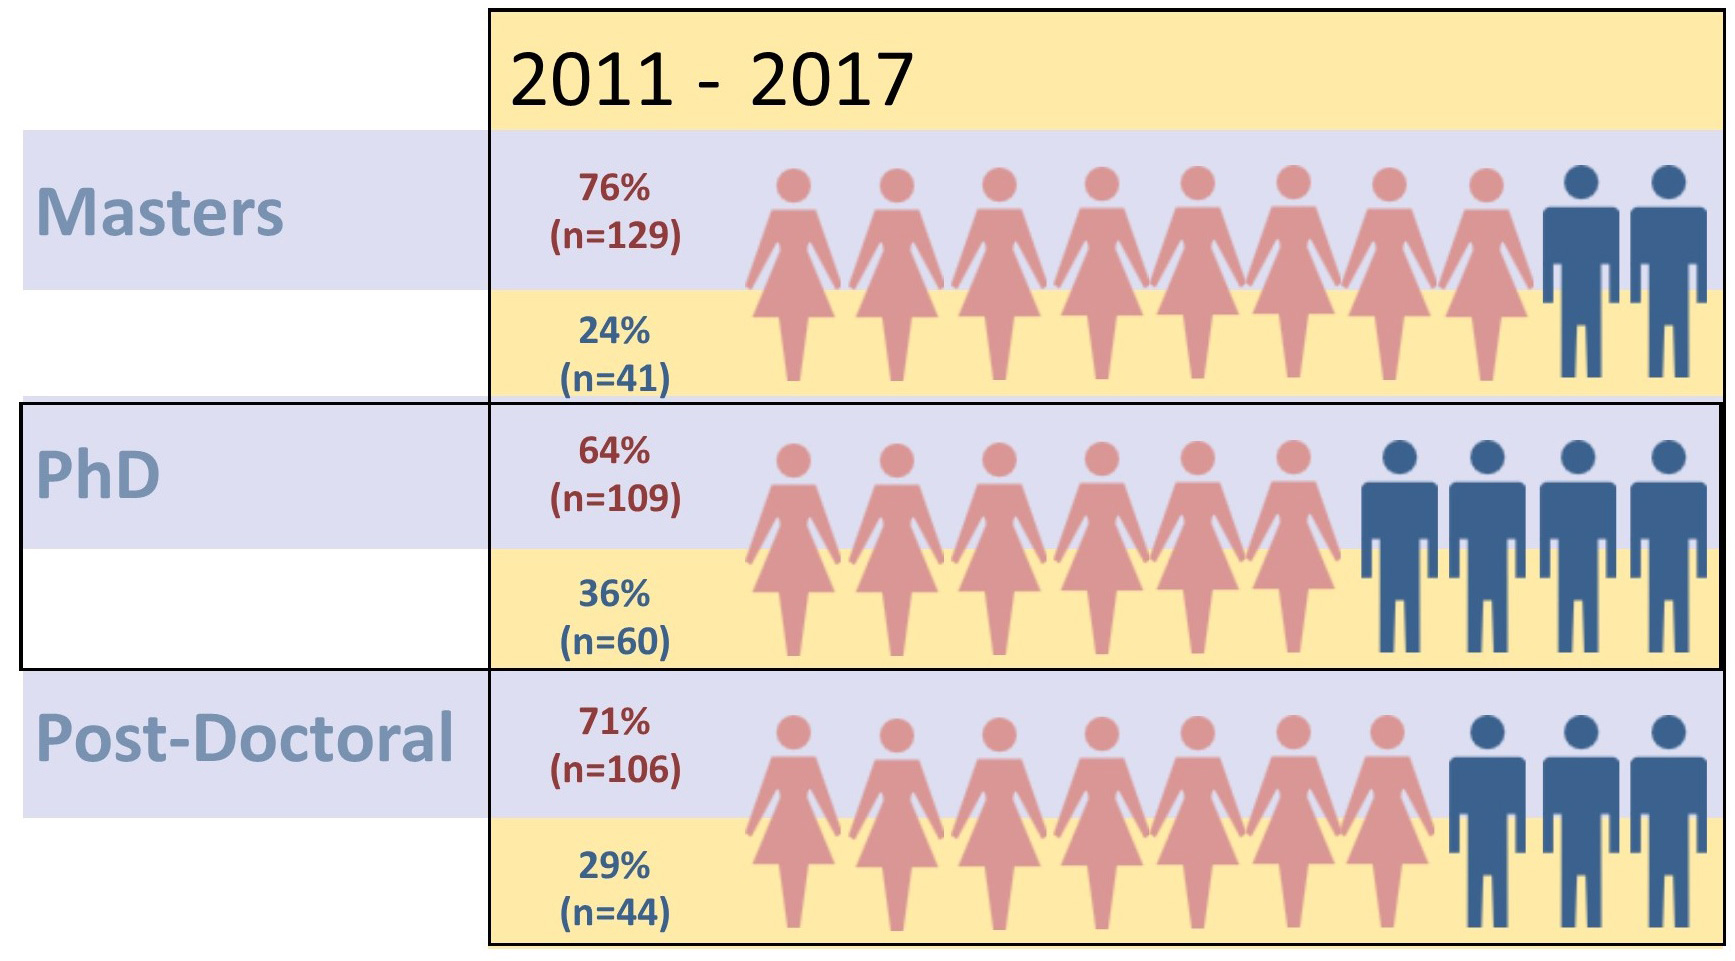 AllerGen NCE Trainees by Gender and Academic Level